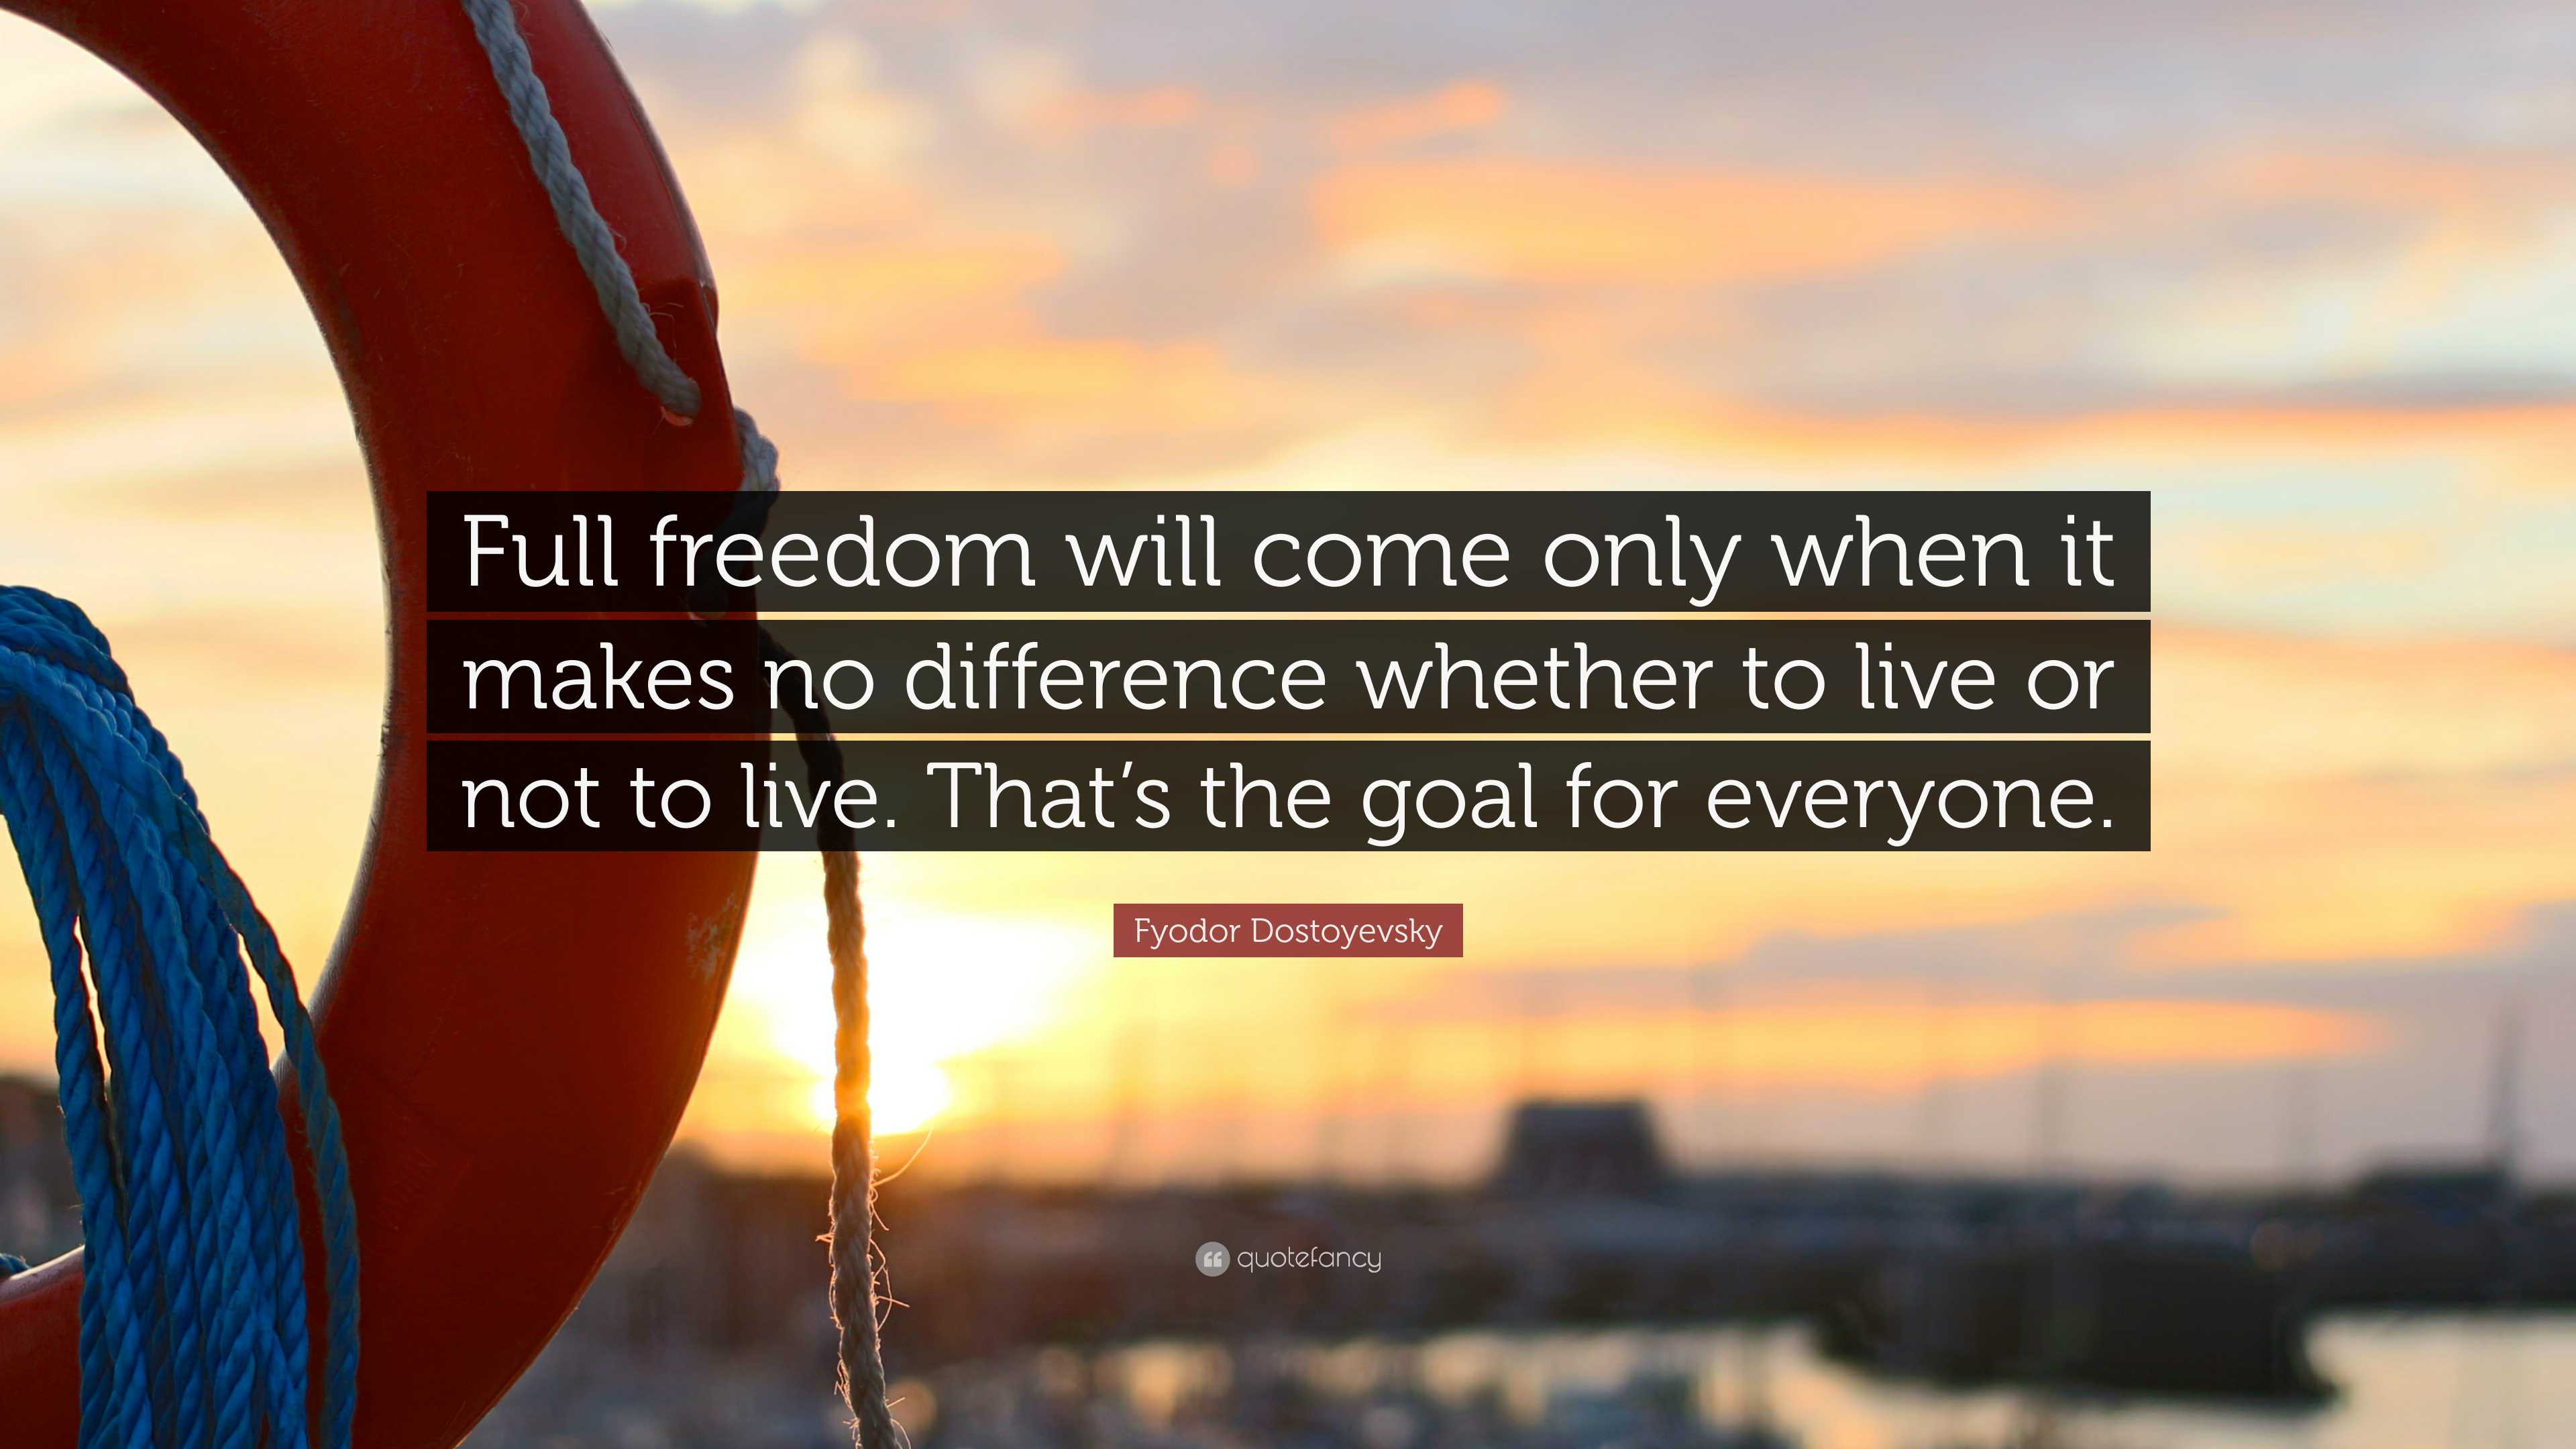 Fyodor Dostoyevsky Quote: “Full freedom will come only when it makes no  difference whether to live